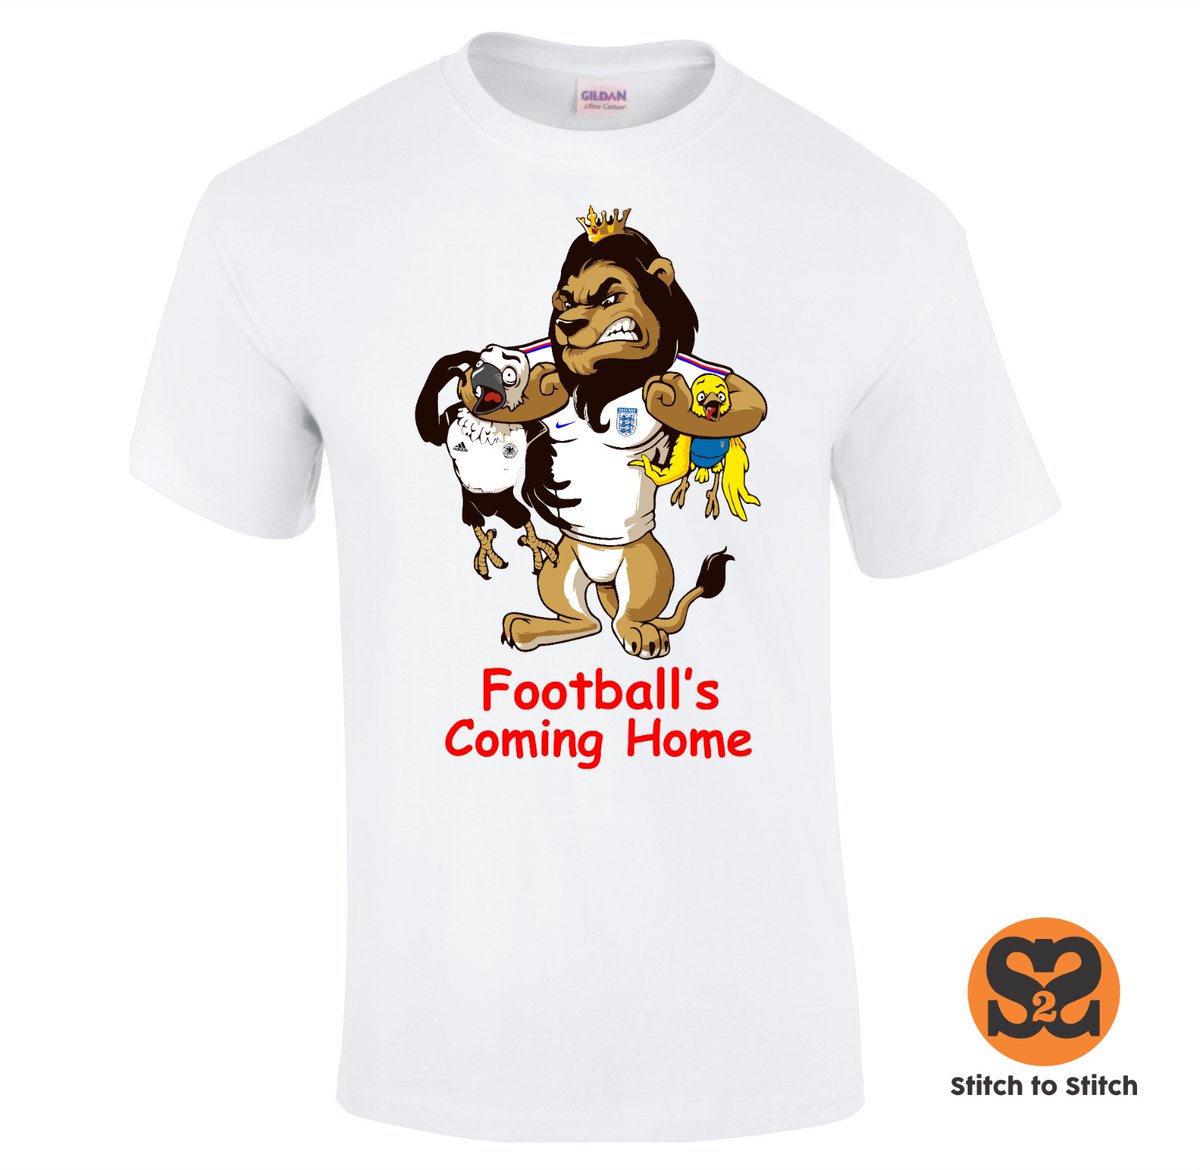 Special Edition England T-shirts available while stocks last. #ItsComingHome #England #Euros2021 #EURO2020 #footballscominghome #football #penge #tshirt